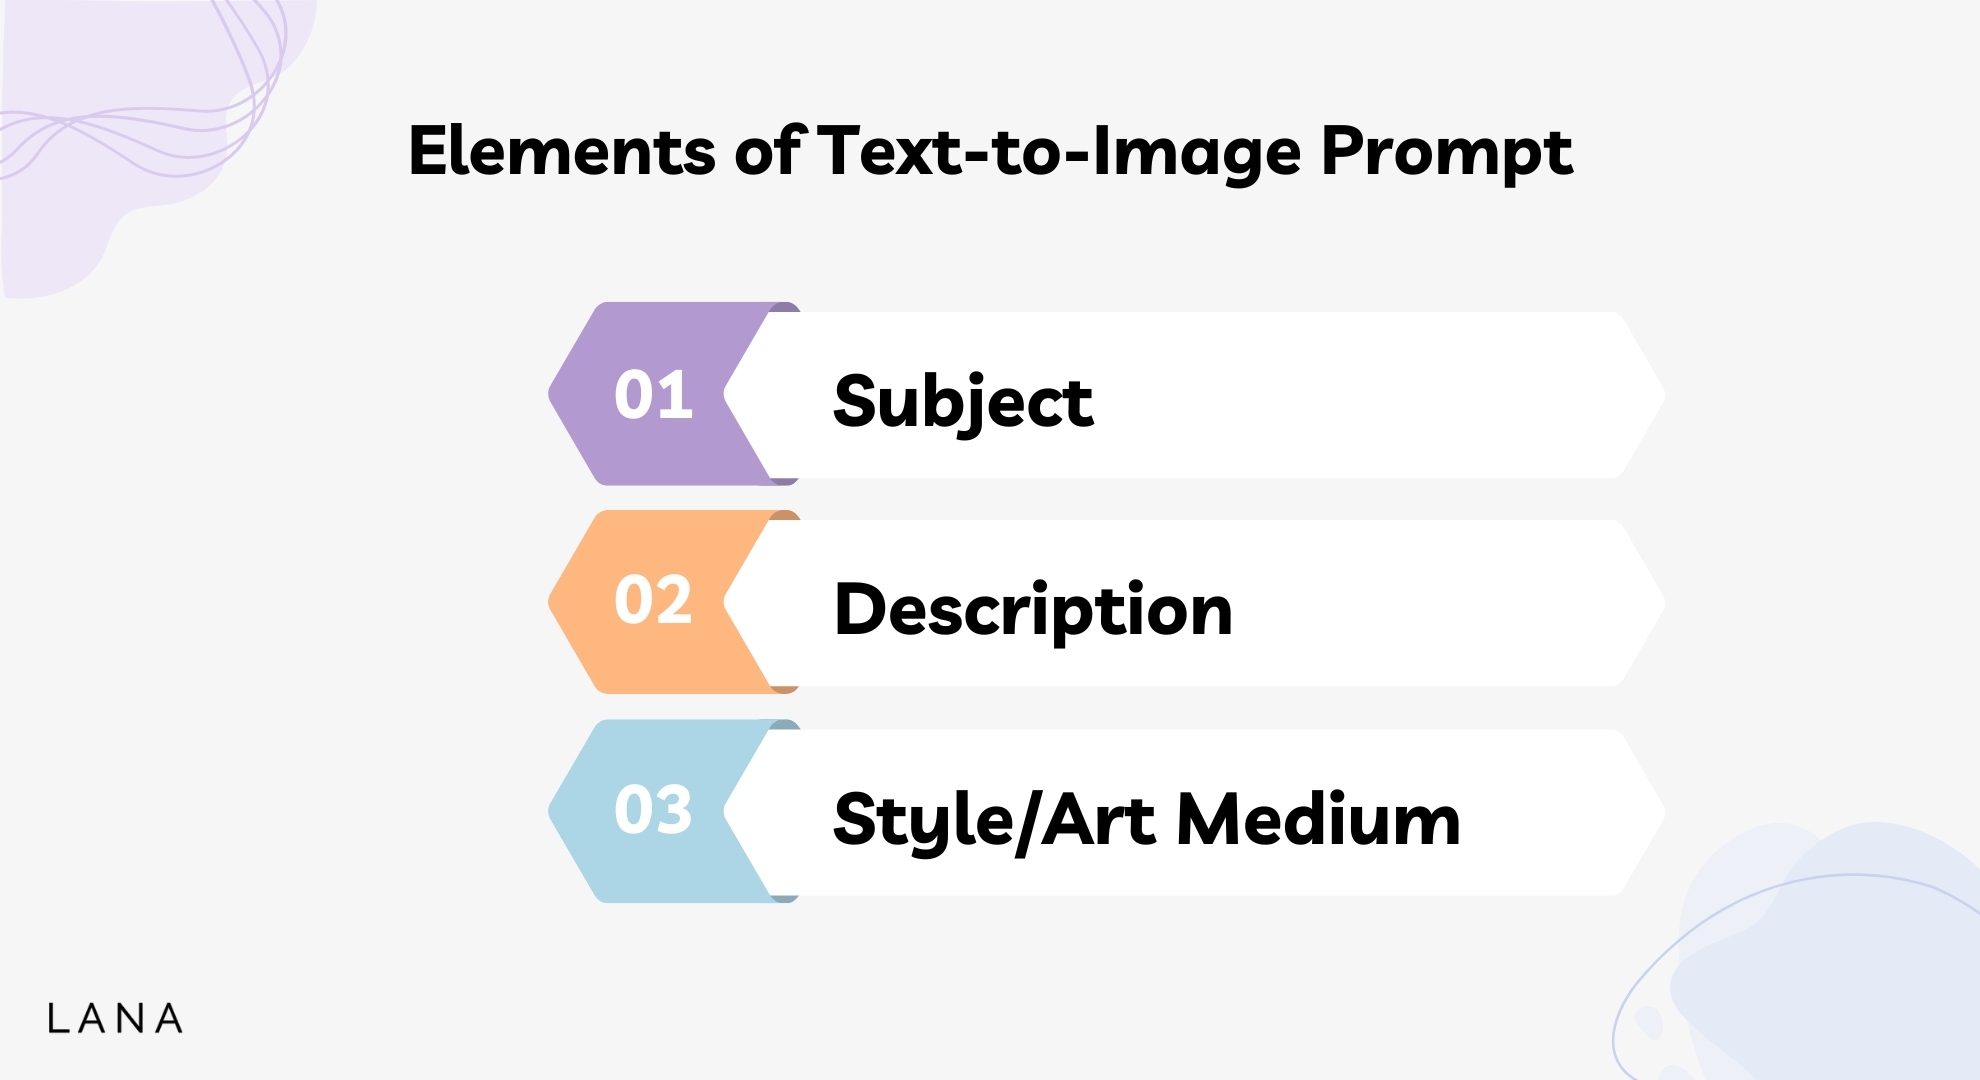 Elements of Text-to-Image Prompt